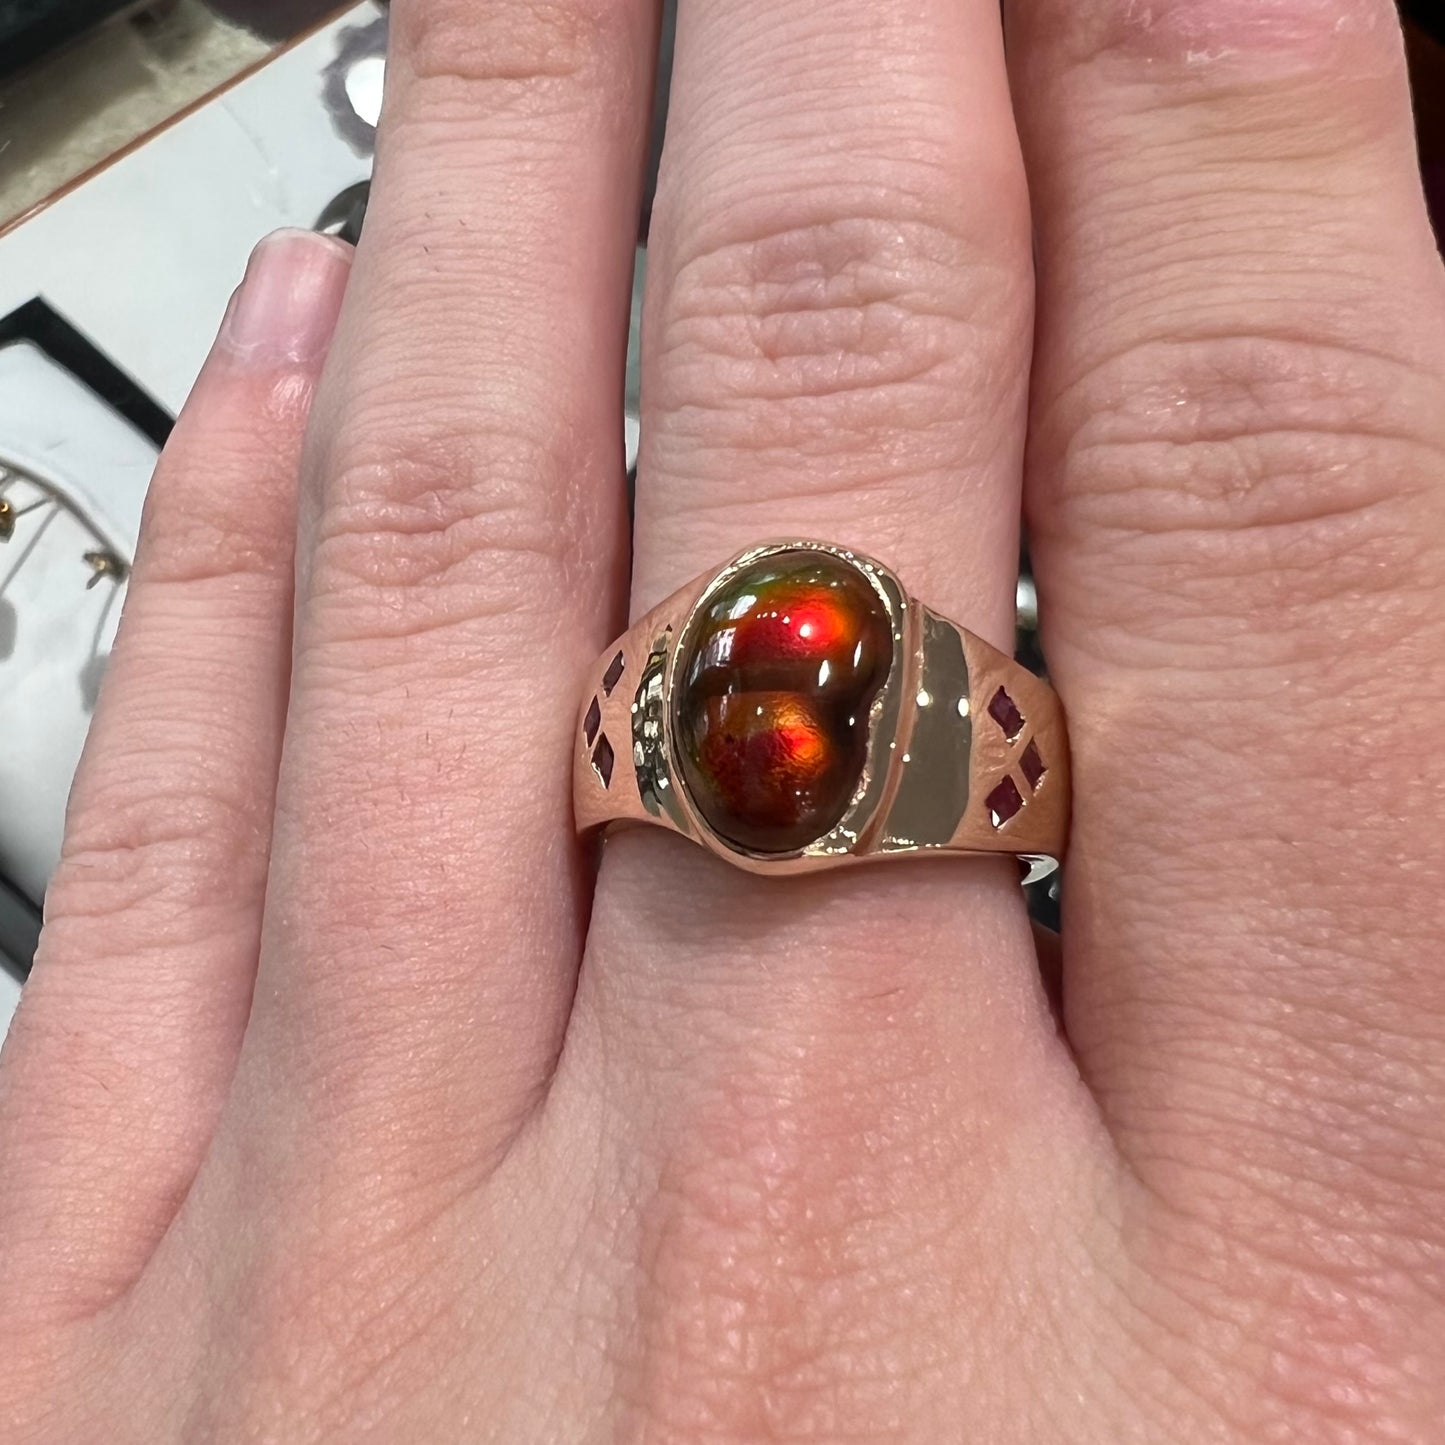 A yellow gold men's ring set with princess cut Burma rubies and a freeform cabochon cut red fire agate from Slaughter Mountain, Arizona.